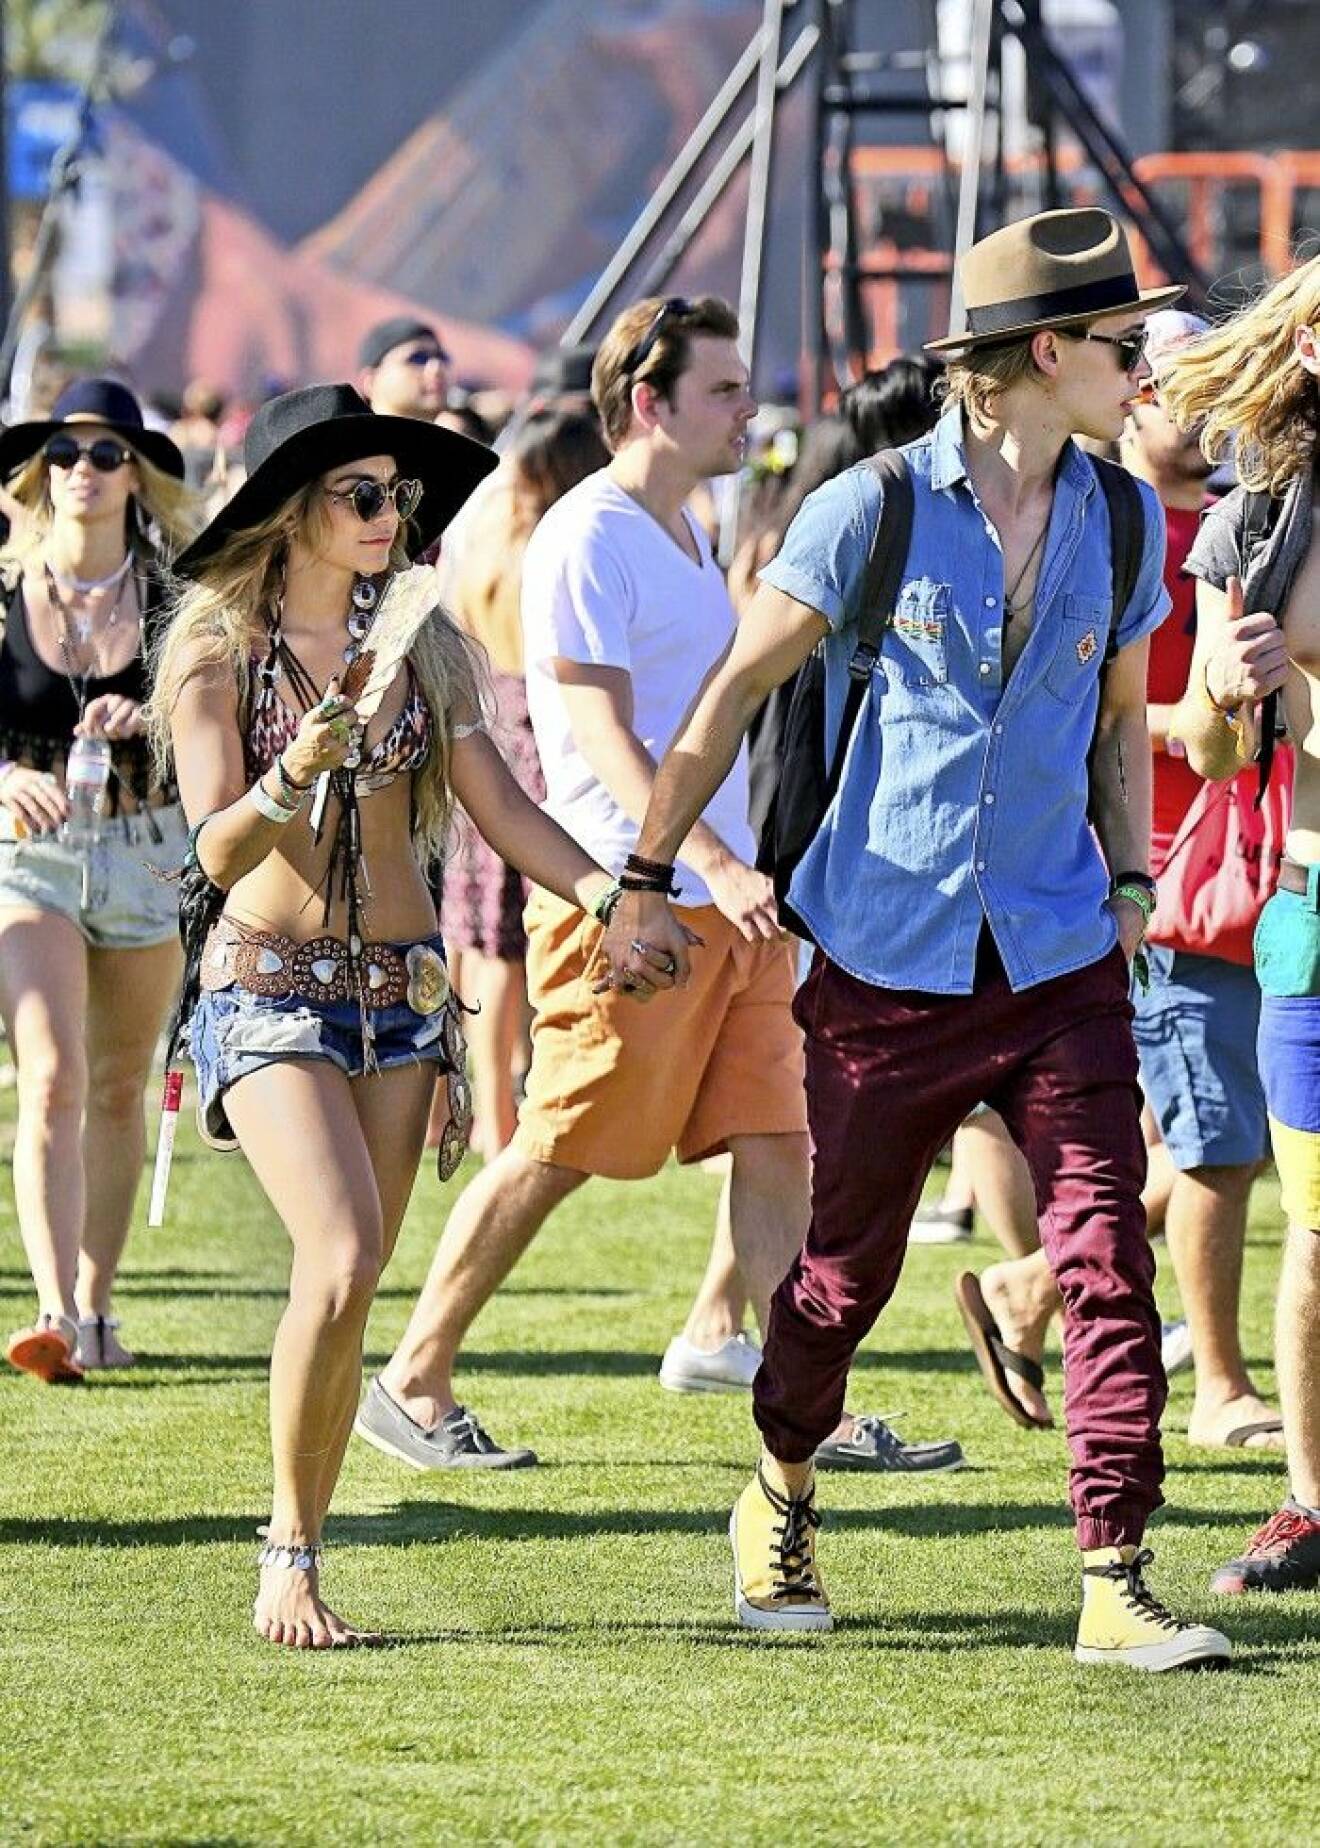 EXCLUSIVE: Vanessa Hudgens and Austin Butler spotted at Coachella Music Festival in Indio, CA